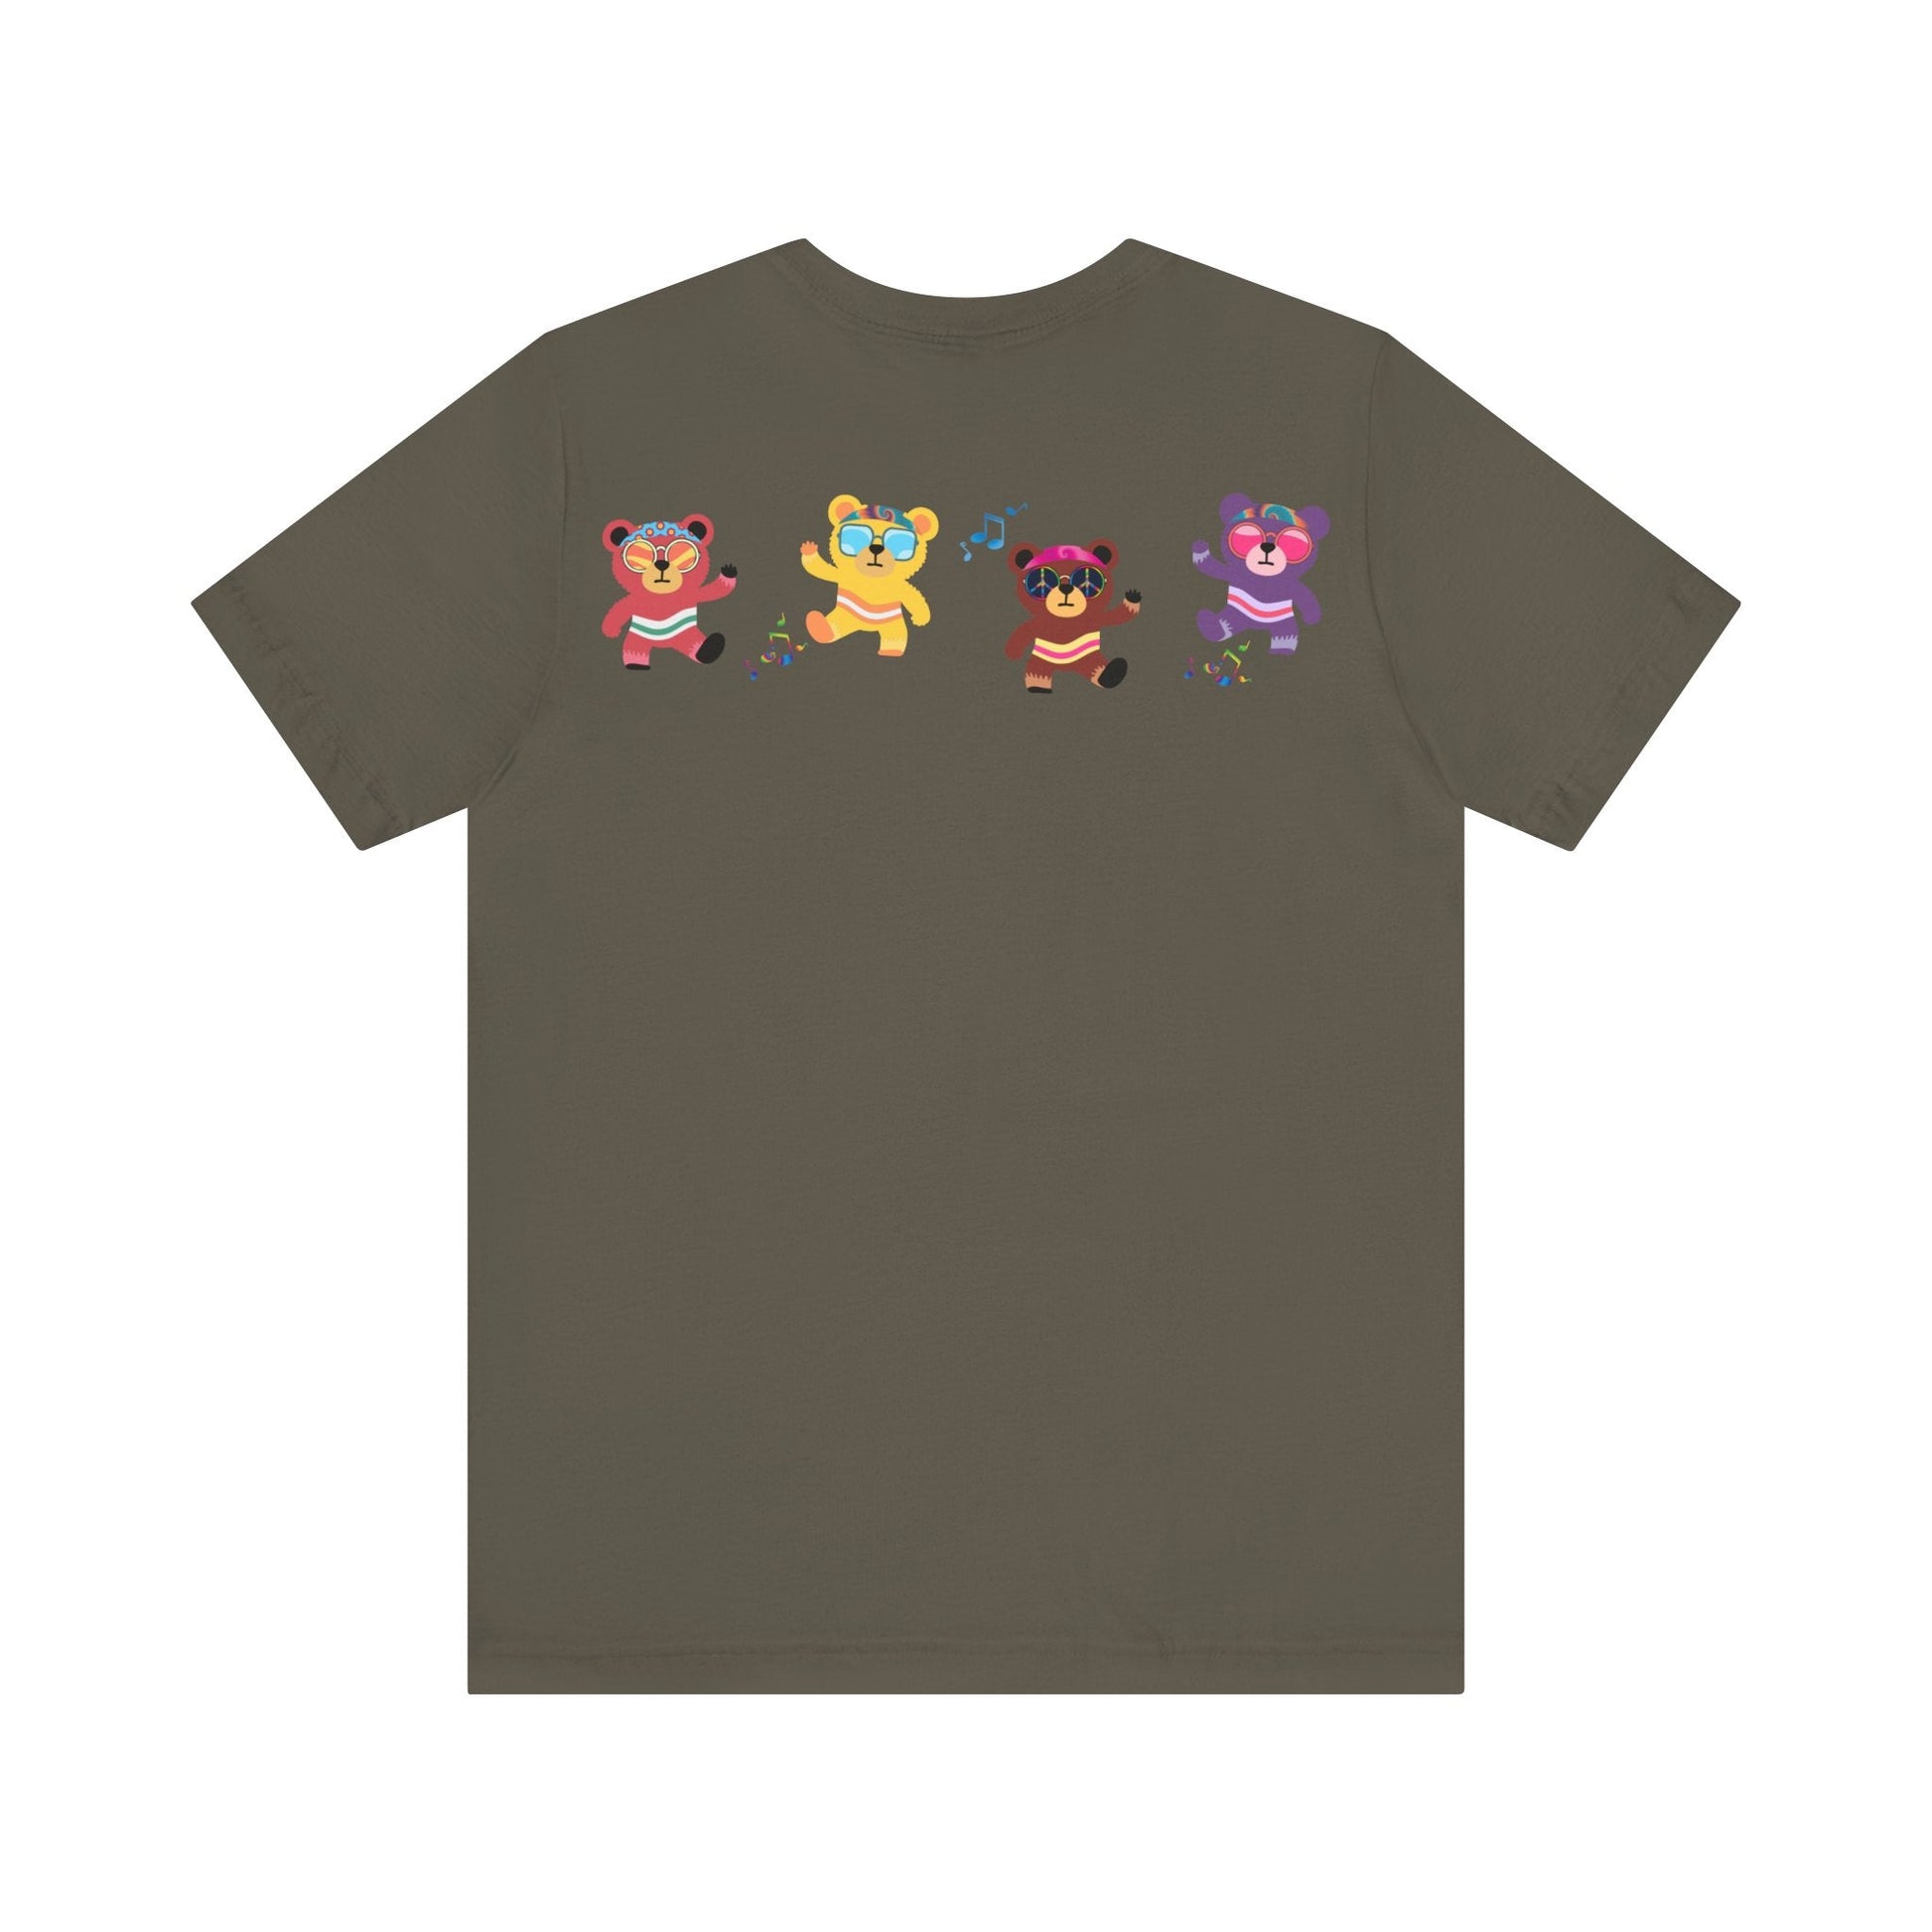 Personalize Free Groovy Dancing Bears Adult Cotton Tee from Baby Squid Ink 